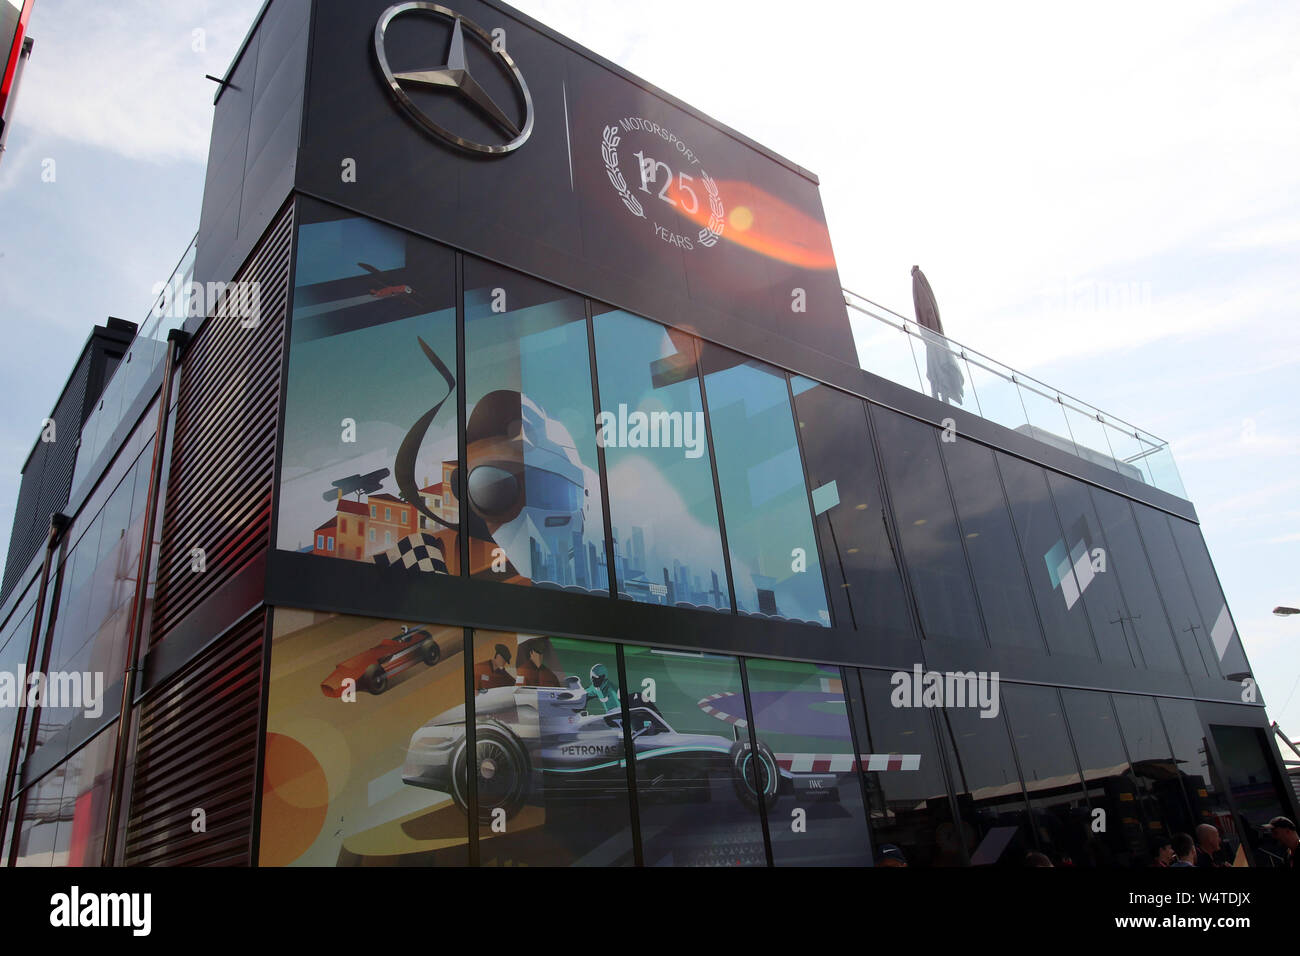 Hockenheim, Germany. 25th July, 2019. Grand Prix Formula One Germany 2019 In the pic: Mercedes AMG F1 W10 with special livery for 125 years in motorsport Credit: LaPresse/Alamy Live News Stock Photo